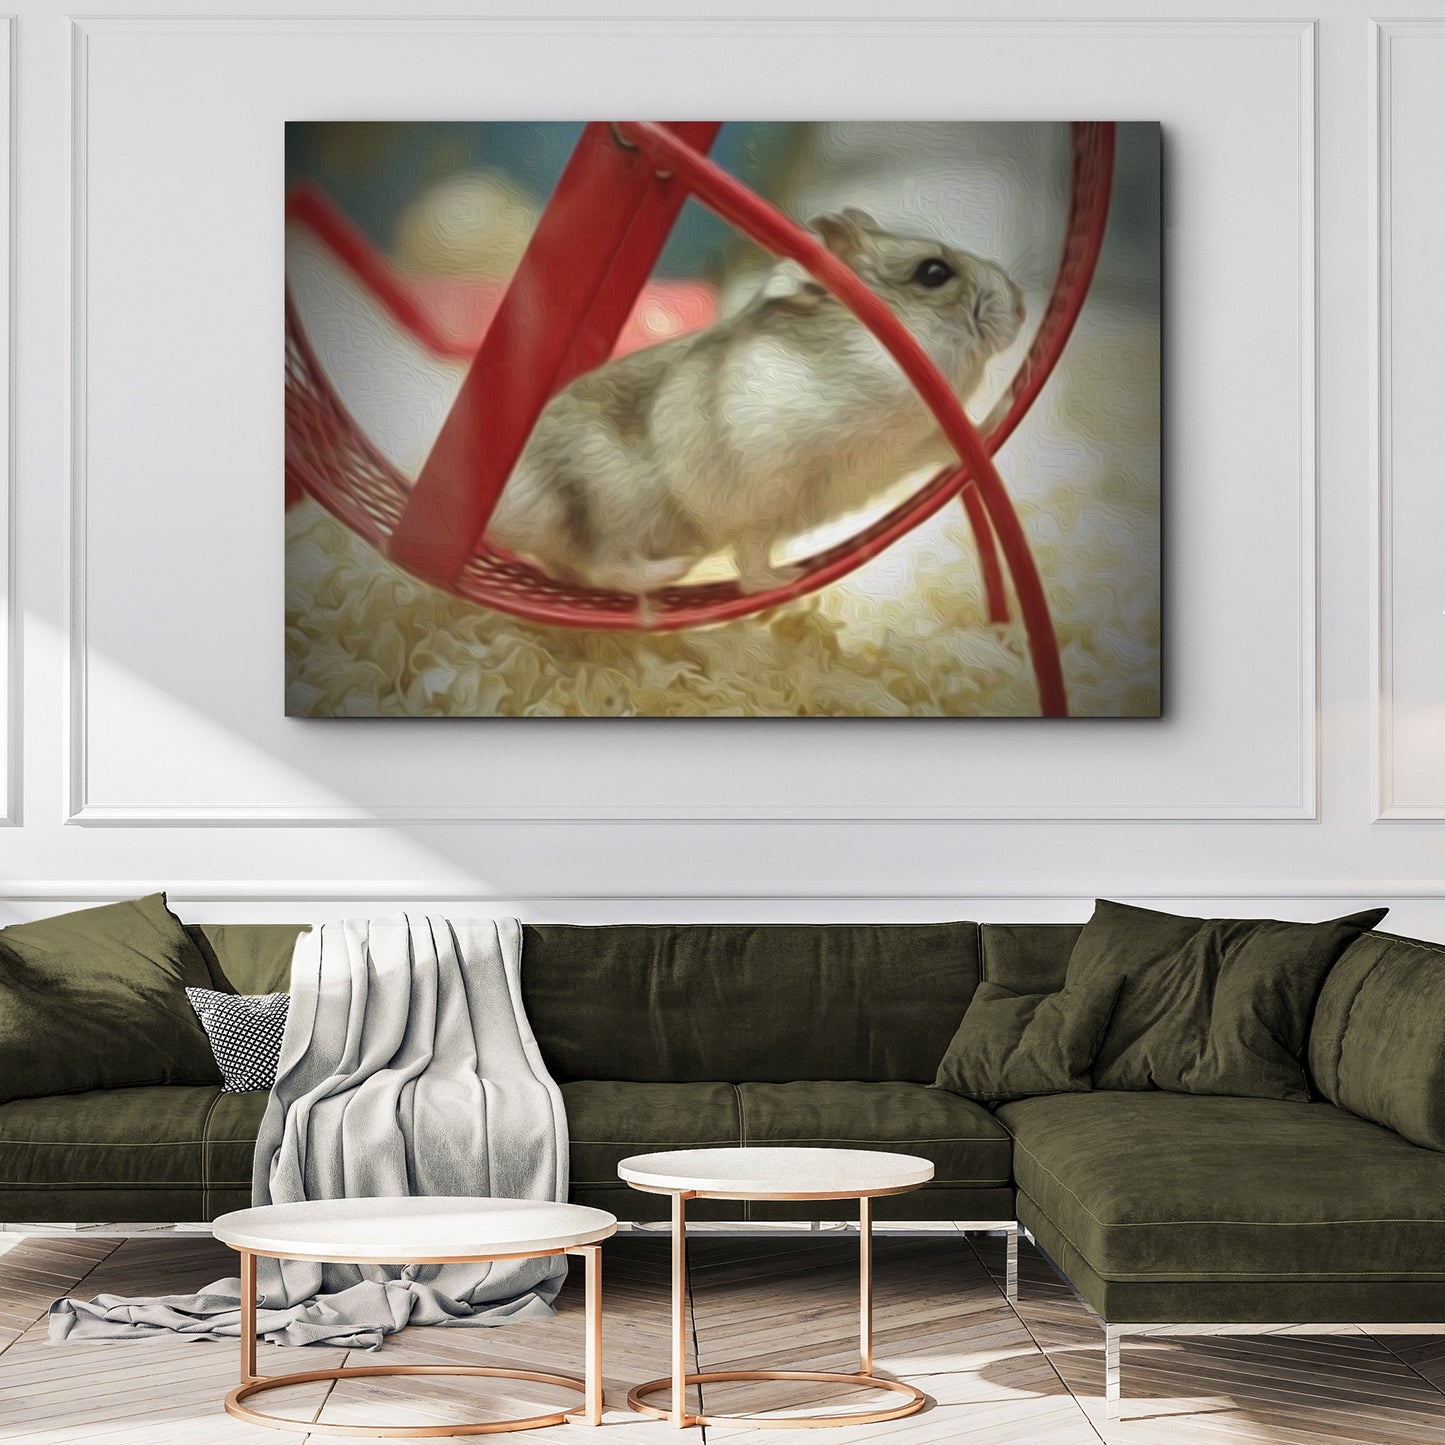 Hamster In Wheel Oil Paint Canvas Wall Art Style 2 - Image by Tailored Canvases